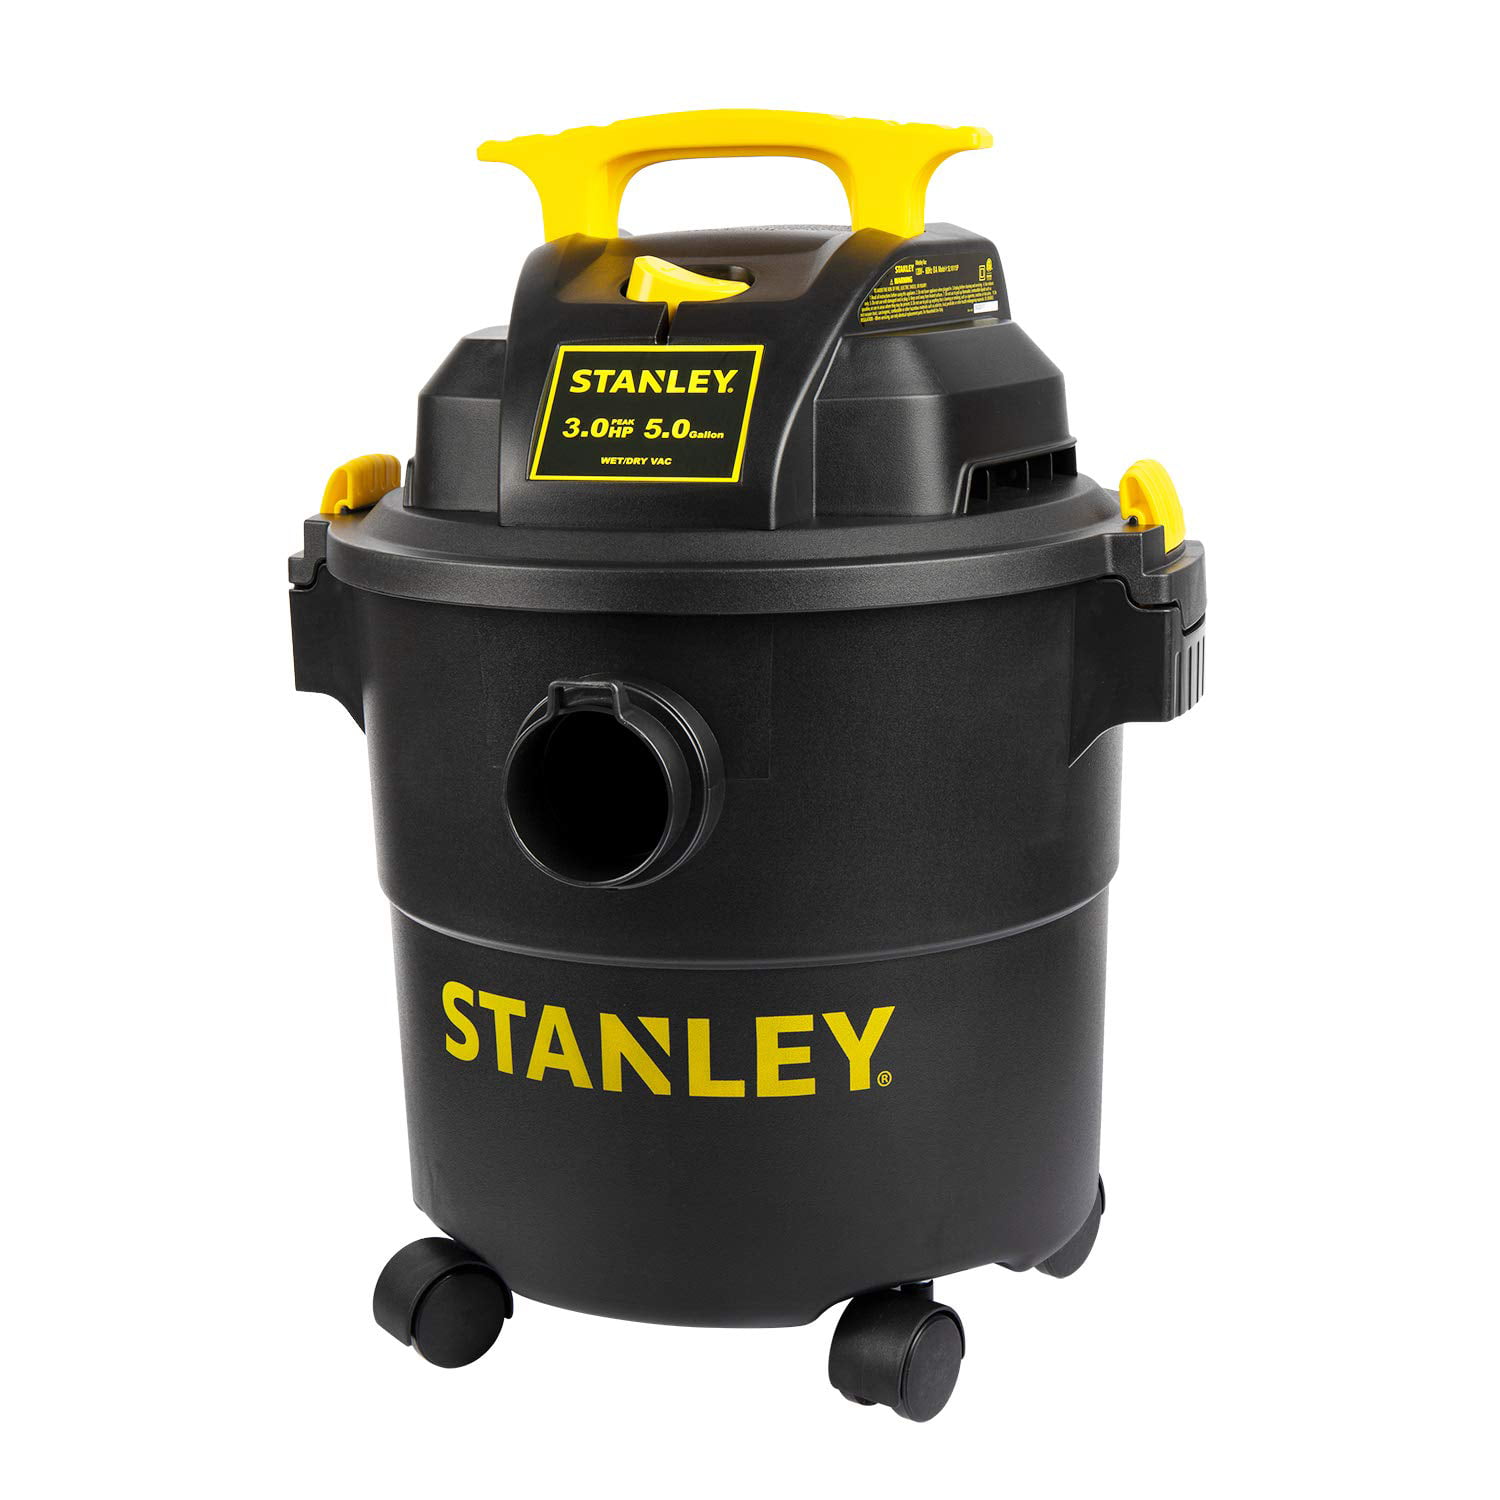 Car Detailing with Attachments Stanley Shop Vac SL18115P Shop Cleaning Carpet Clean 5 Gallon Peak 4 Horsepower Wet Dry Vacuums Blower 3 In 1 Functions 15 Feet Cleaning Range For Garage 